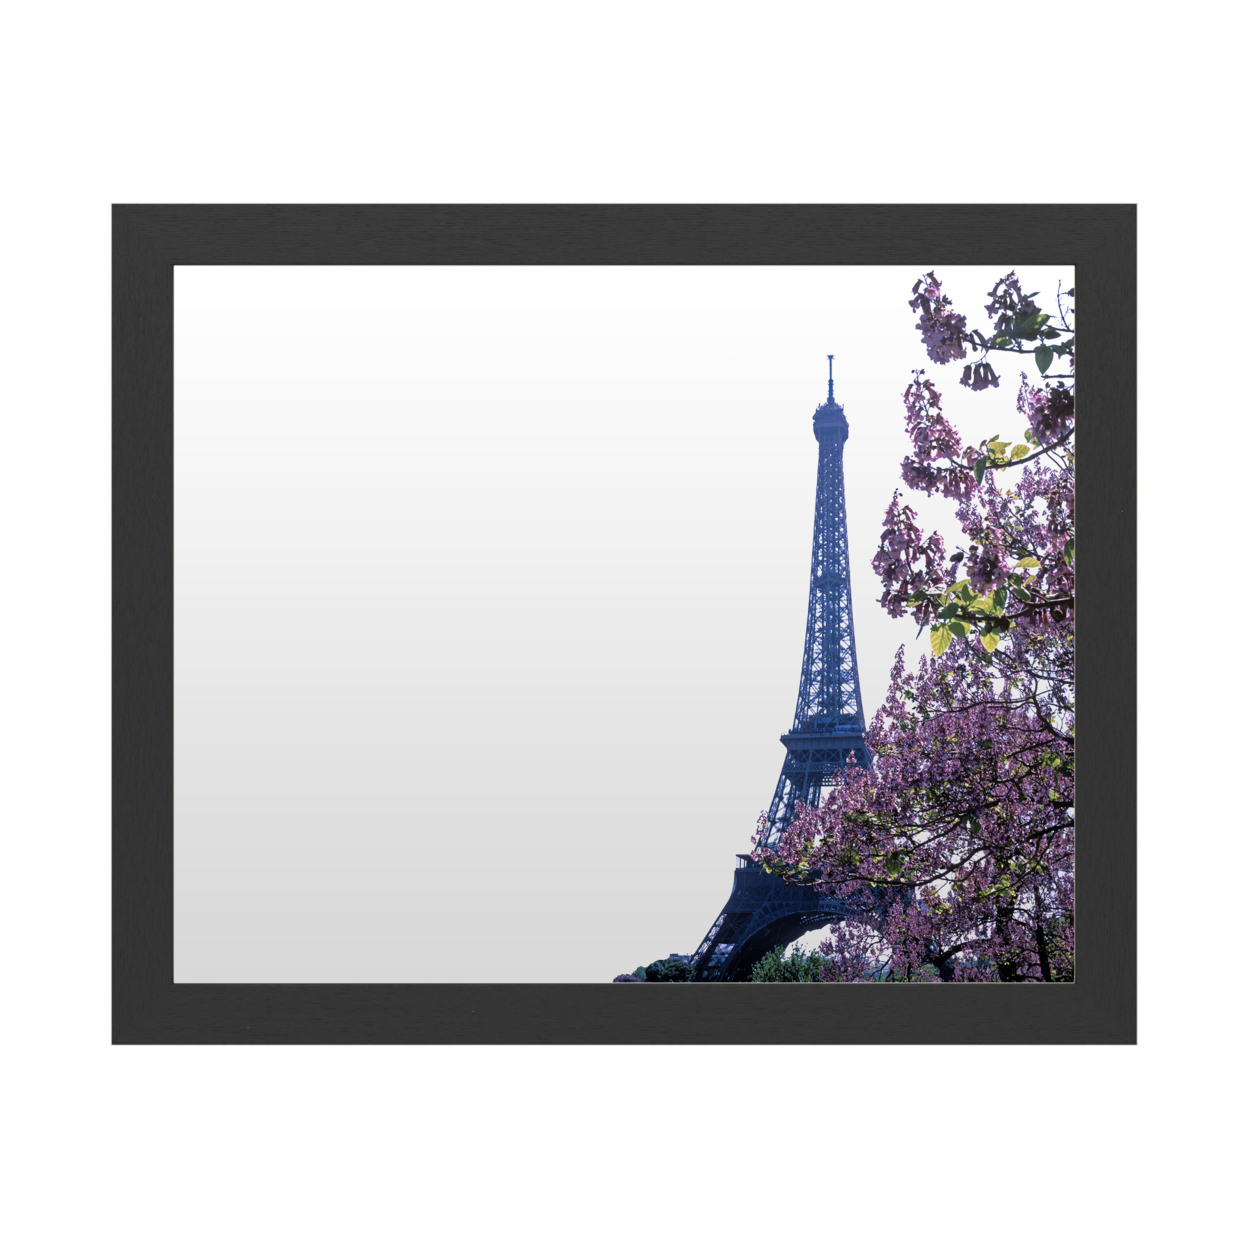 Dry Erase 16 X 20 Marker Board With Printed Artwork - Kathy Yates Eiffel Tower With Blossoms White Board - Ready To Hang